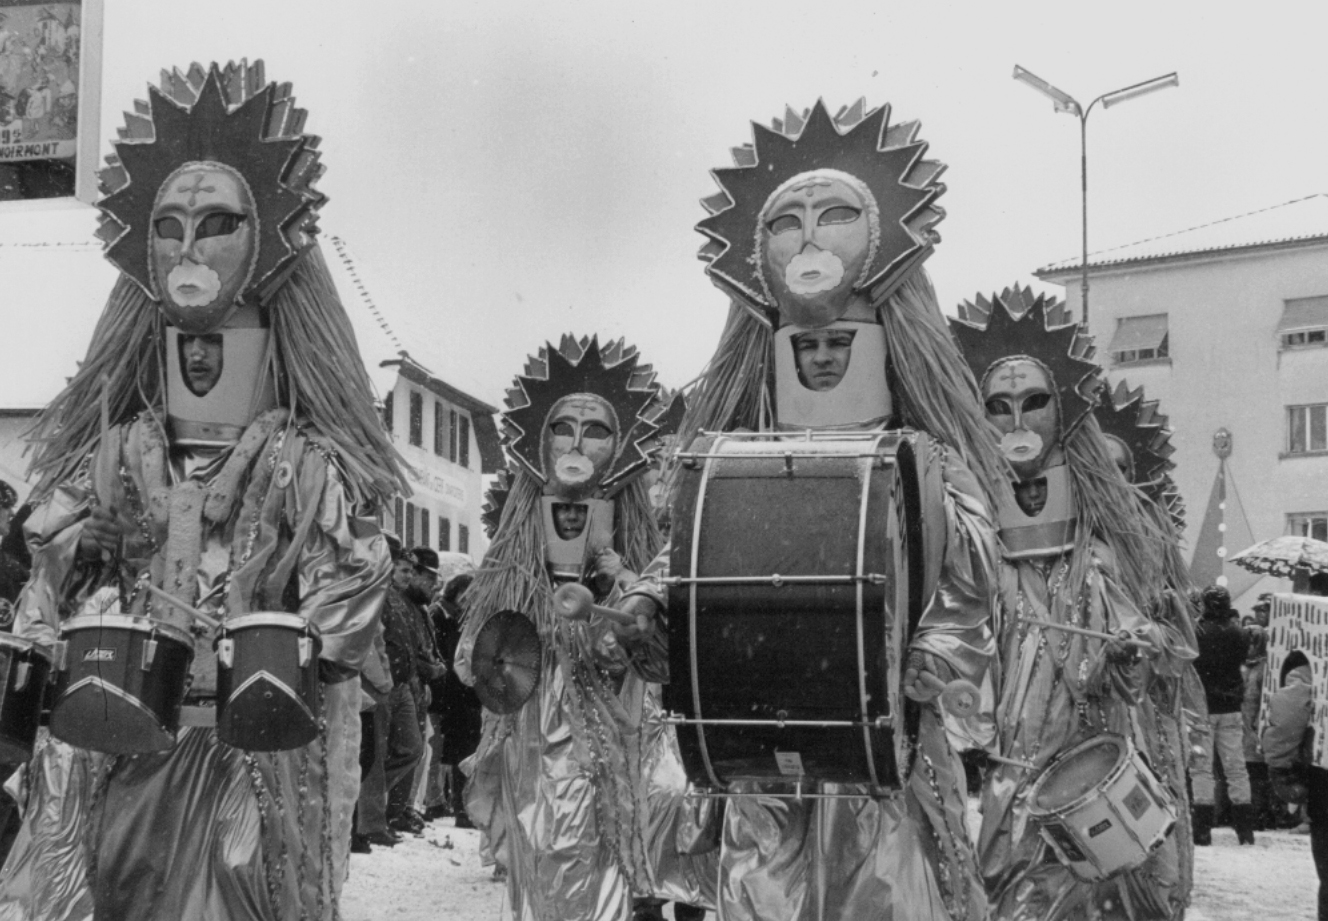 The procession with its lavish costumes in Le Noirmont © Archives cantonales jurassiennes (ArCJ), 1993